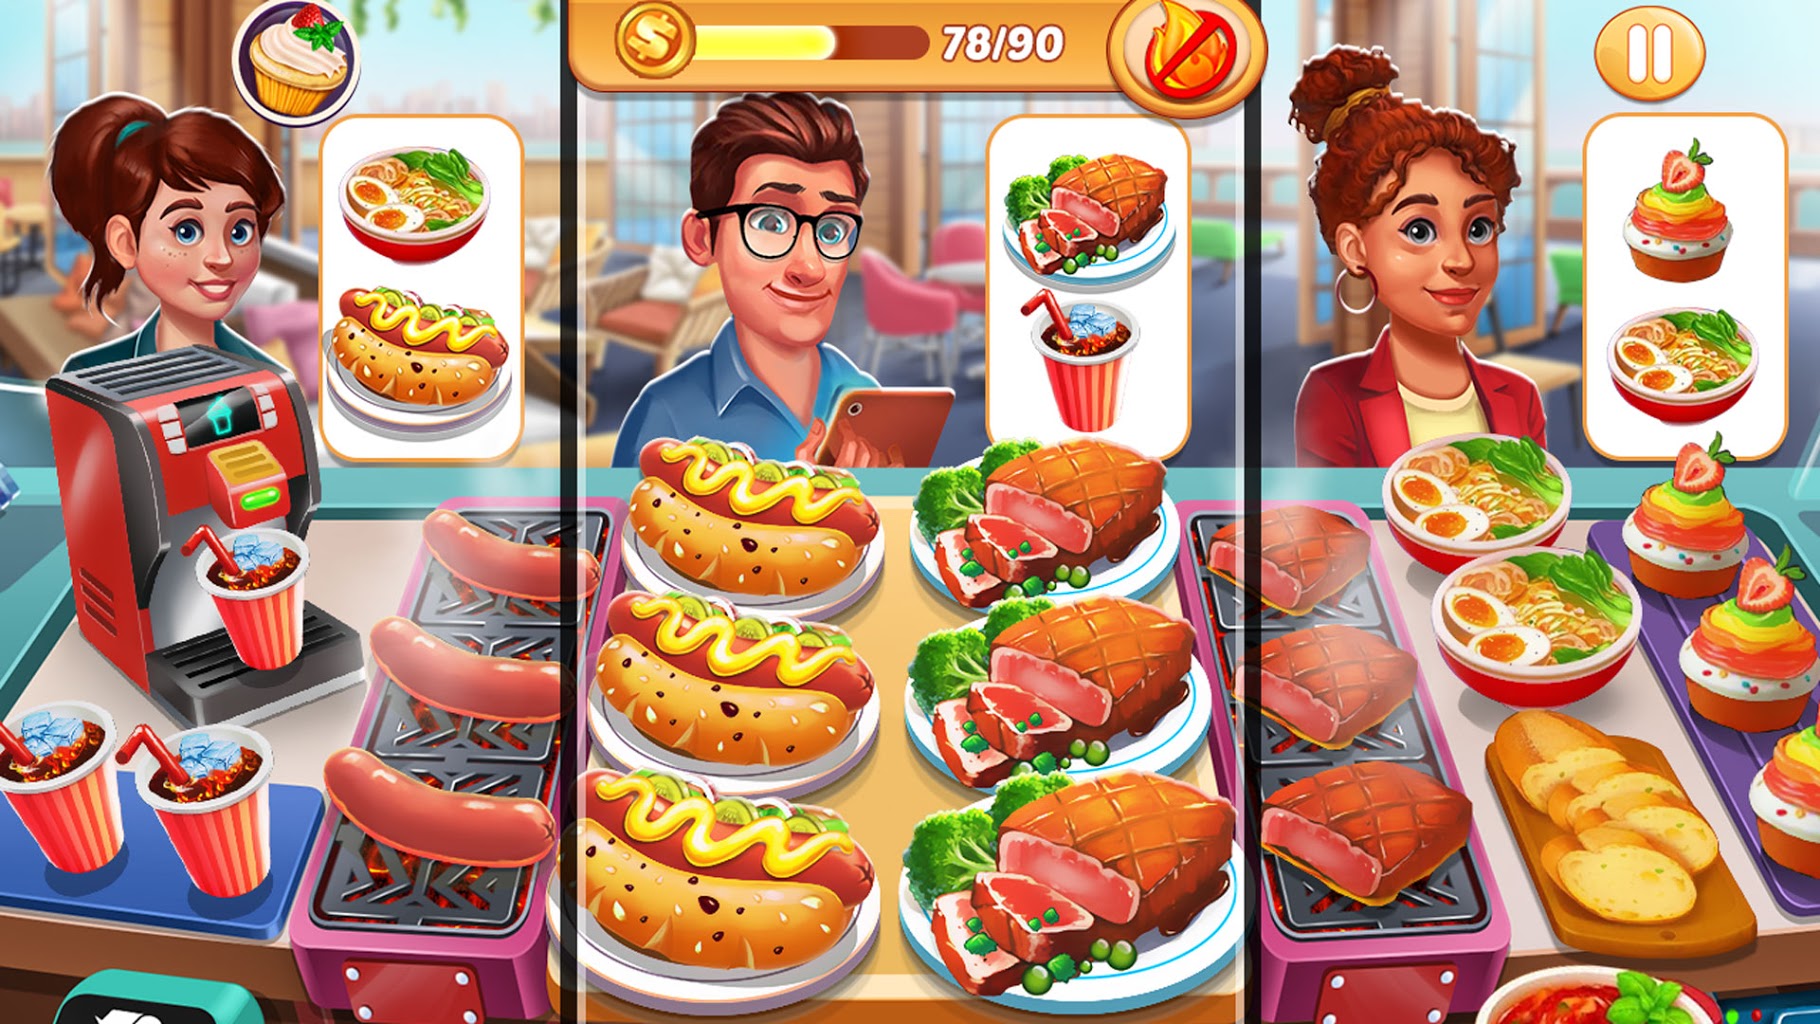 Download Cooking Shop : Chef Restaurant Cooking Games 2020 10.2 APK for ...